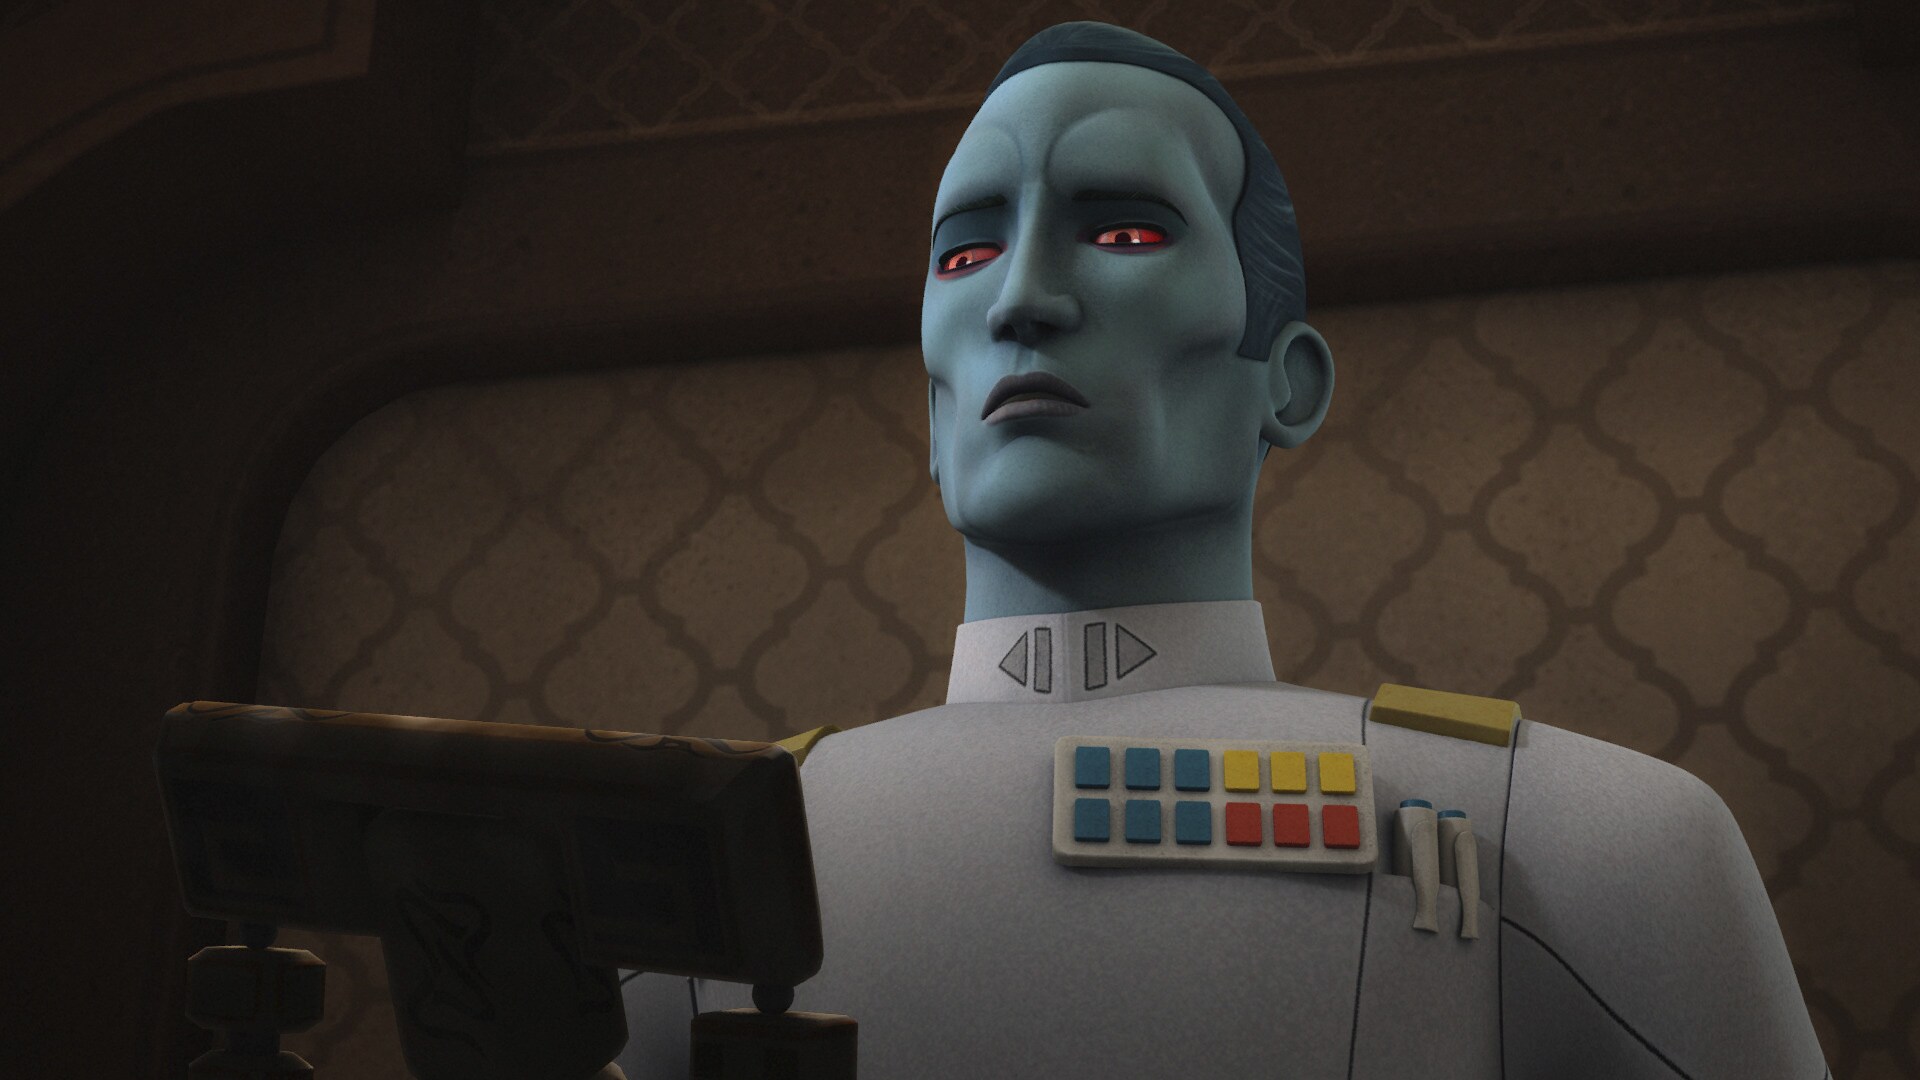 During his assignment to help quash rebel activity on the world of Ryloth, Thrawn set up headquarters in the childhood home of Hera Syndulla.